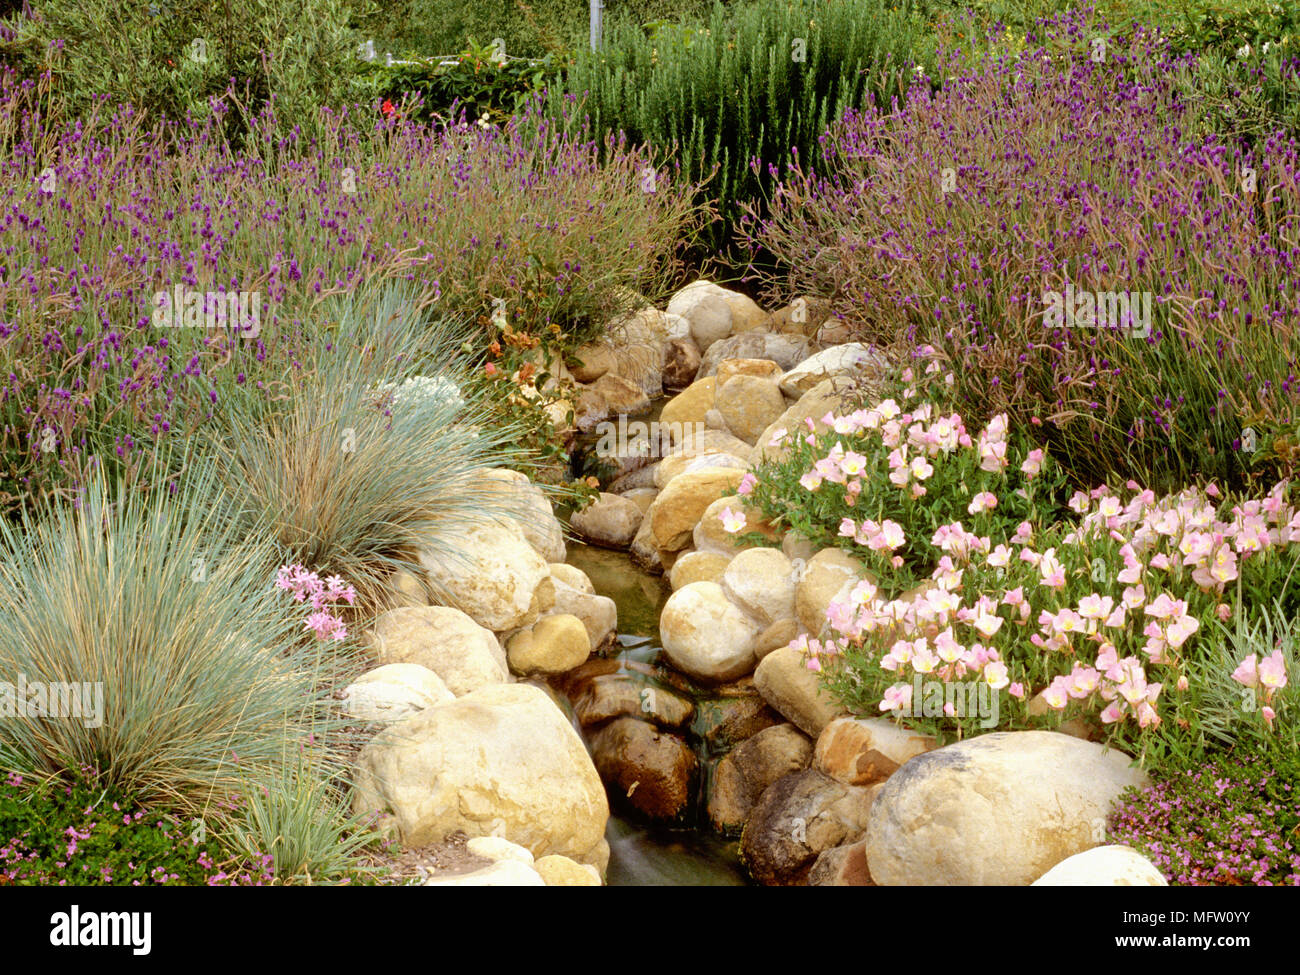 Rocky stream amongst plantings of Lavandula angustifolia, Oenothera sp, Tulbaghia violacea and Helictotrichon sempervirens Stock Photo